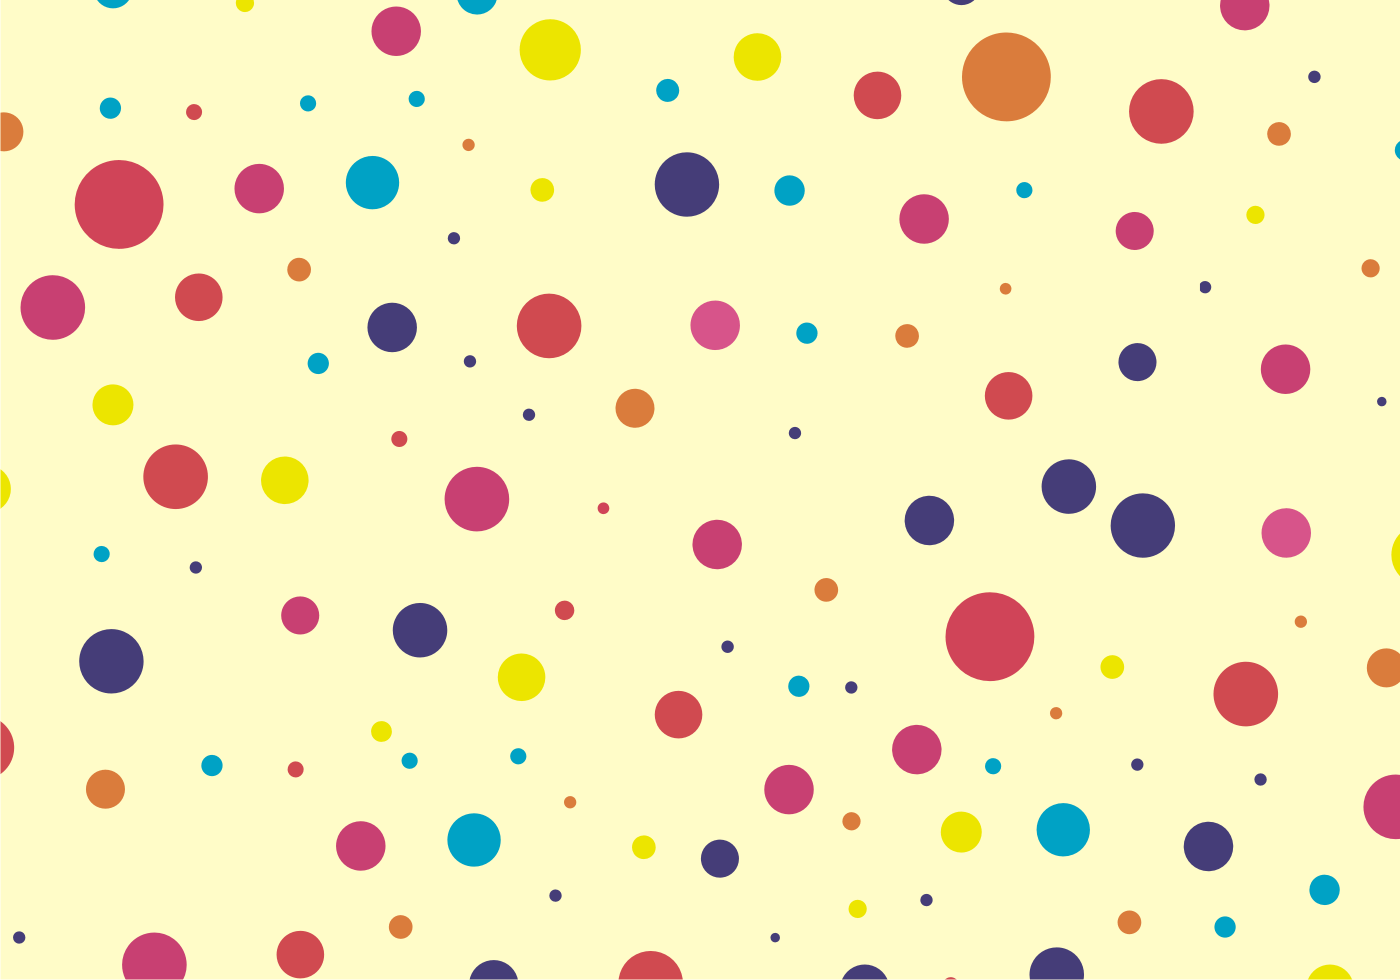 Free vector Cute & Colorful Dots Pattern Free Vector. My